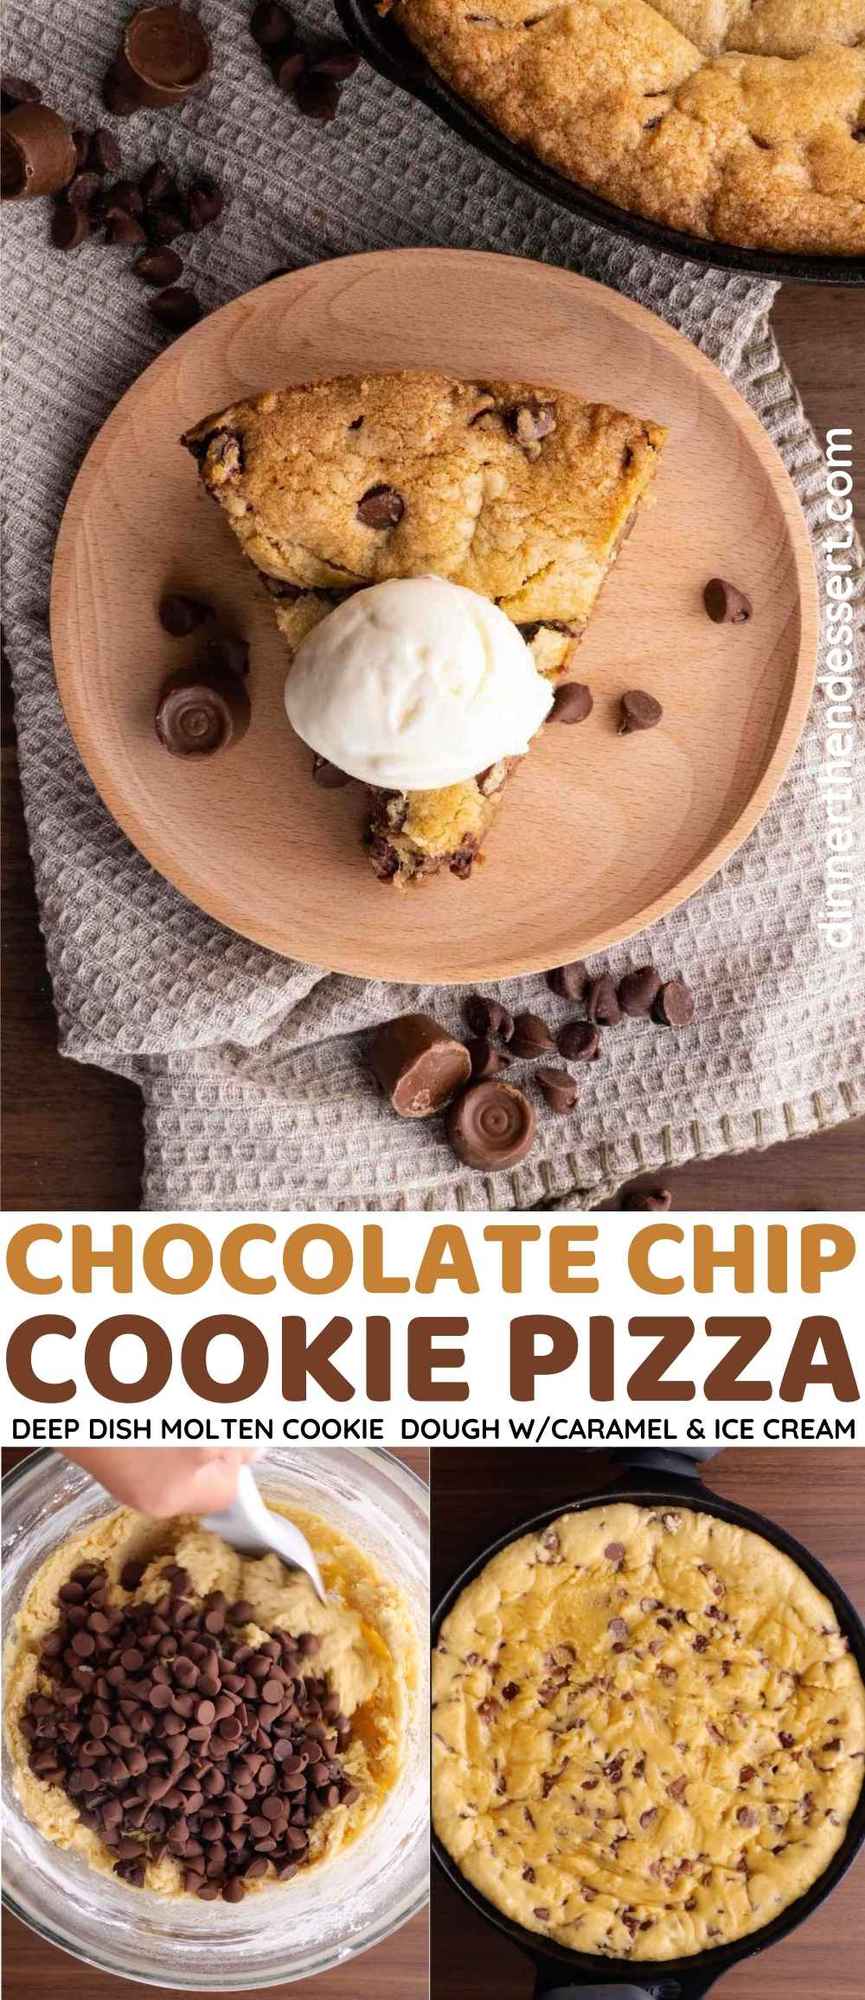 Chocolate Caramel Cookie Pizza Collage